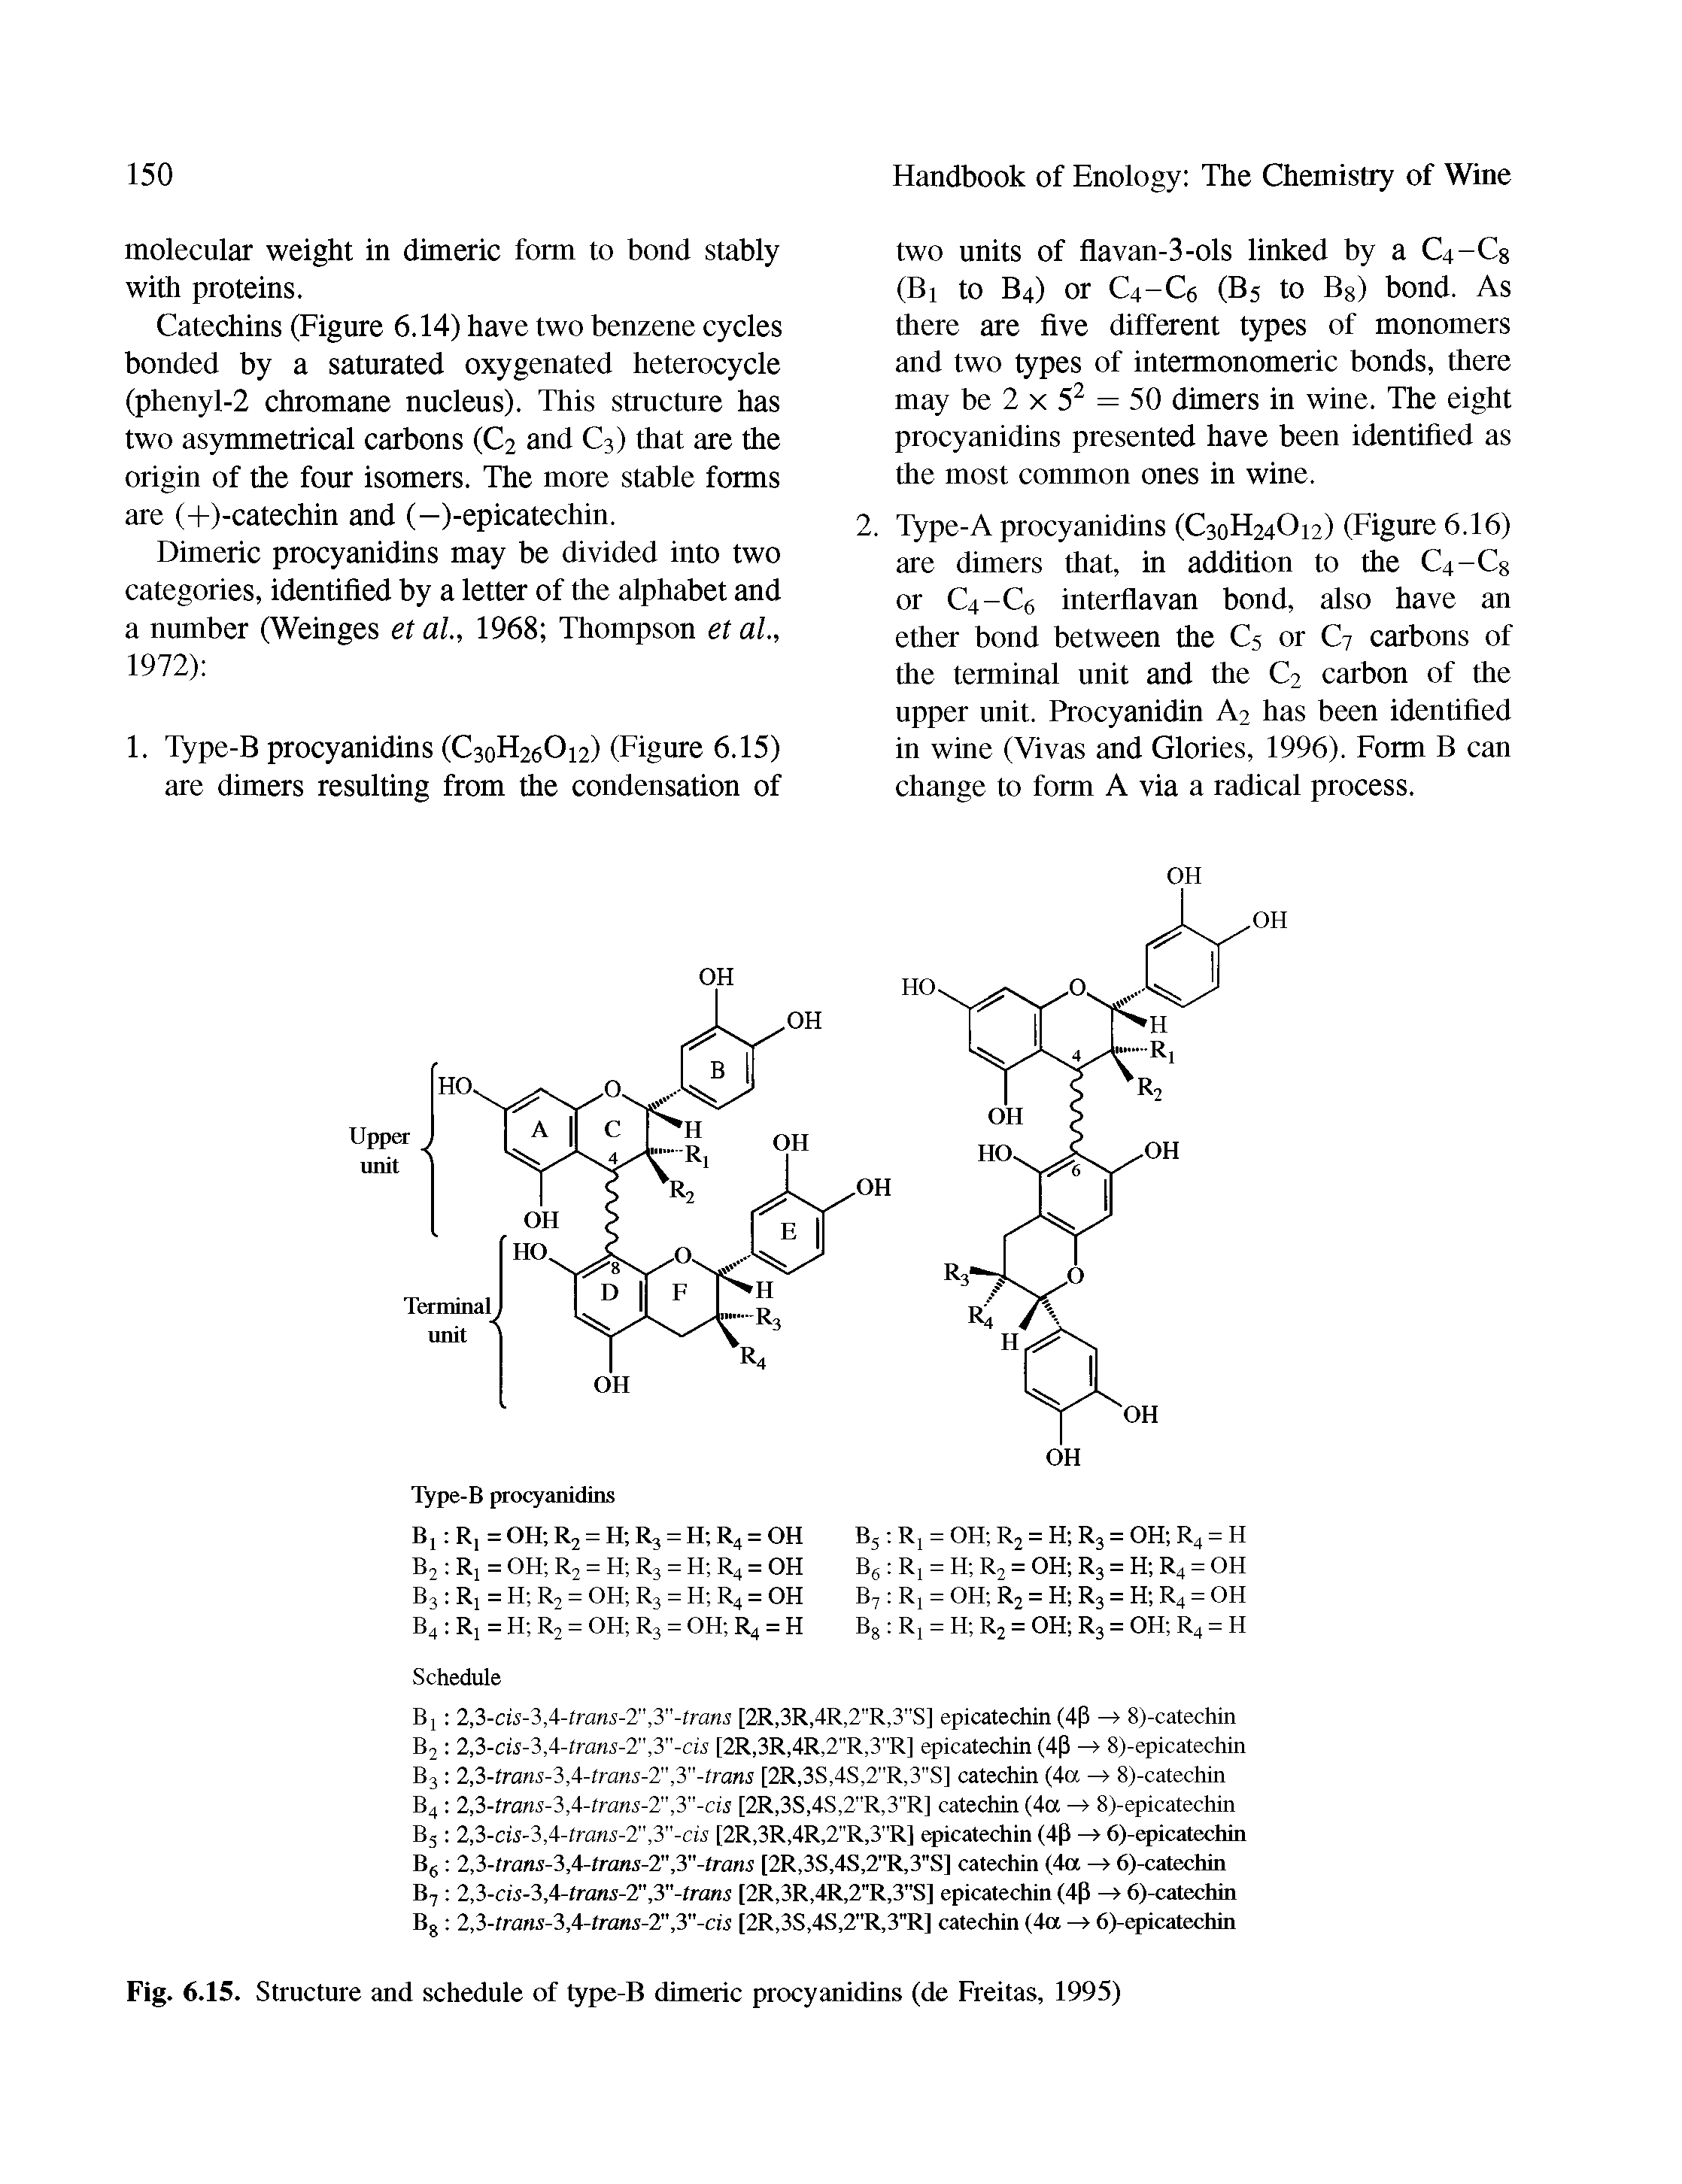 Fig. 6.15. Structure and schedule of type-B dimeric procyanidins (de Freitas, 1995)...